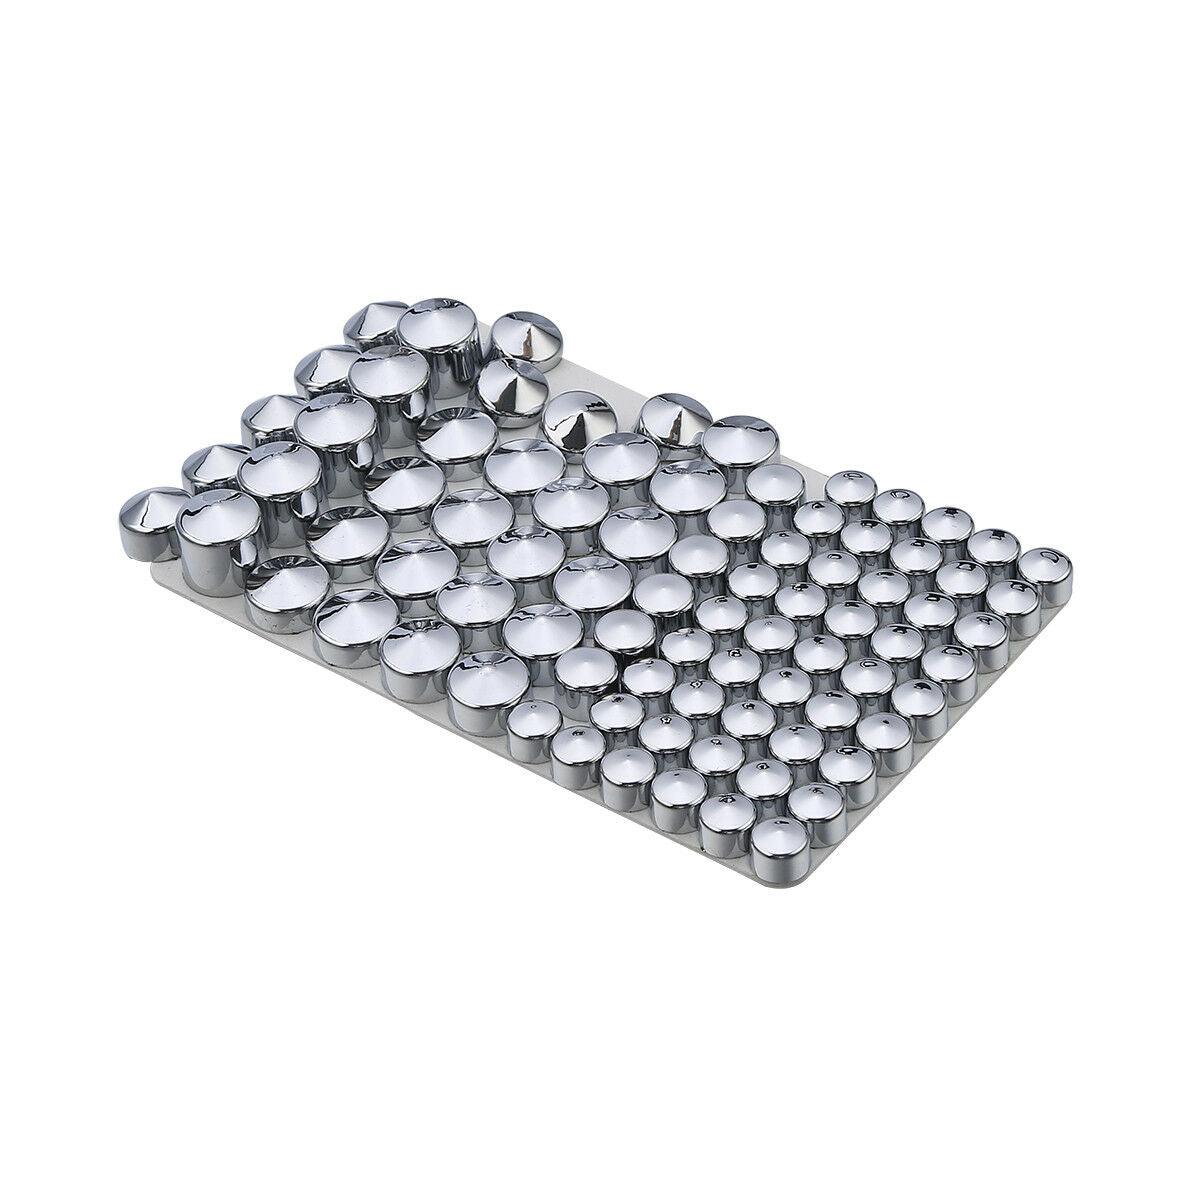 83 PCS Chrome Bolts Topper Cap Cover Fit For Harley Twin Cam Road King FLHT - Moto Life Products